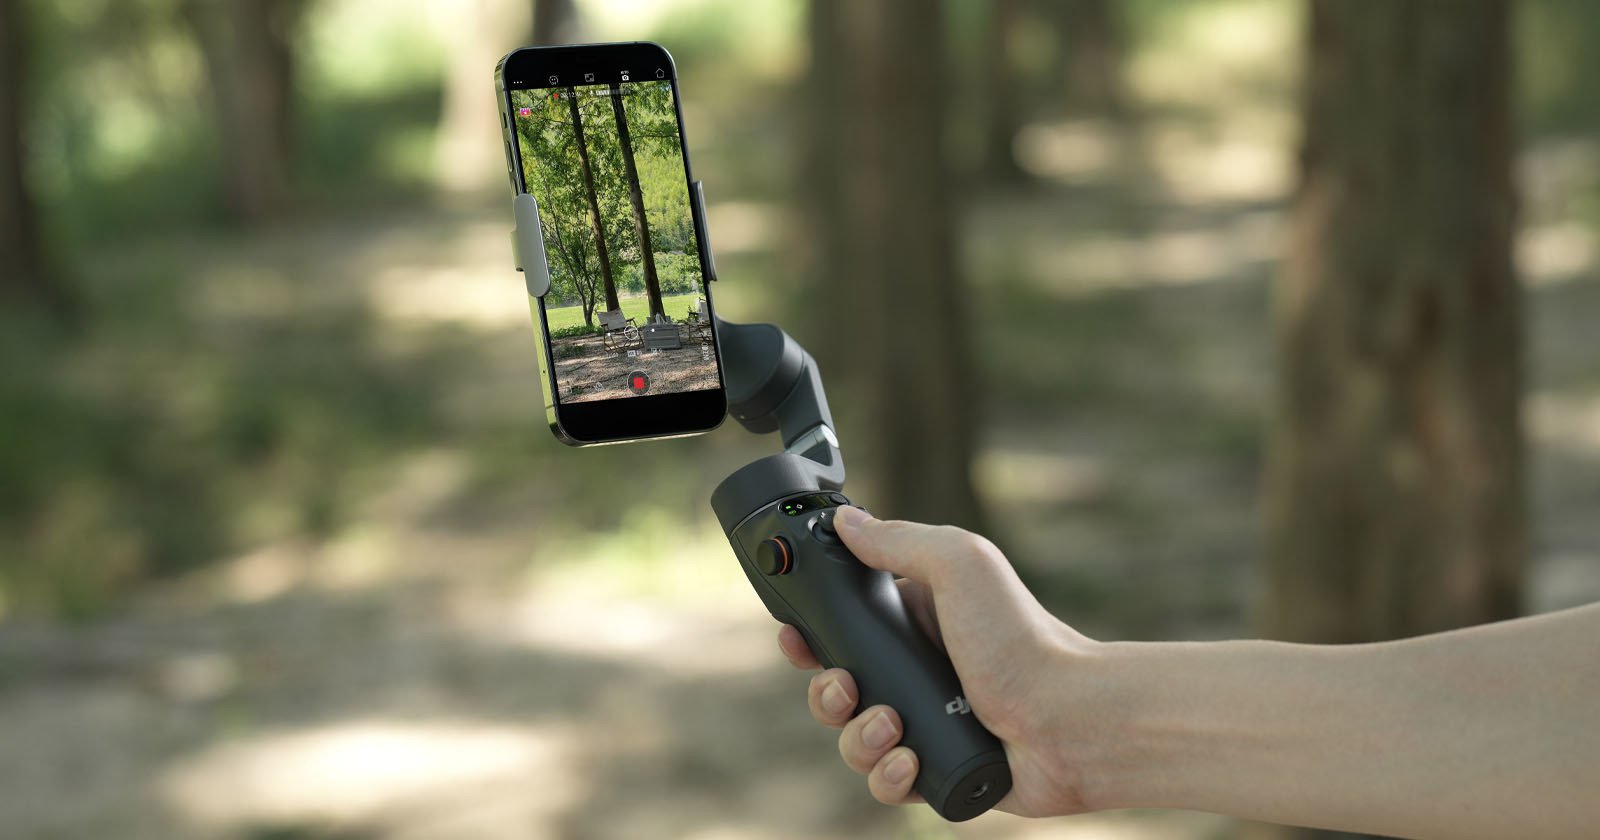 DJI's Osmo Mobile 6 is its